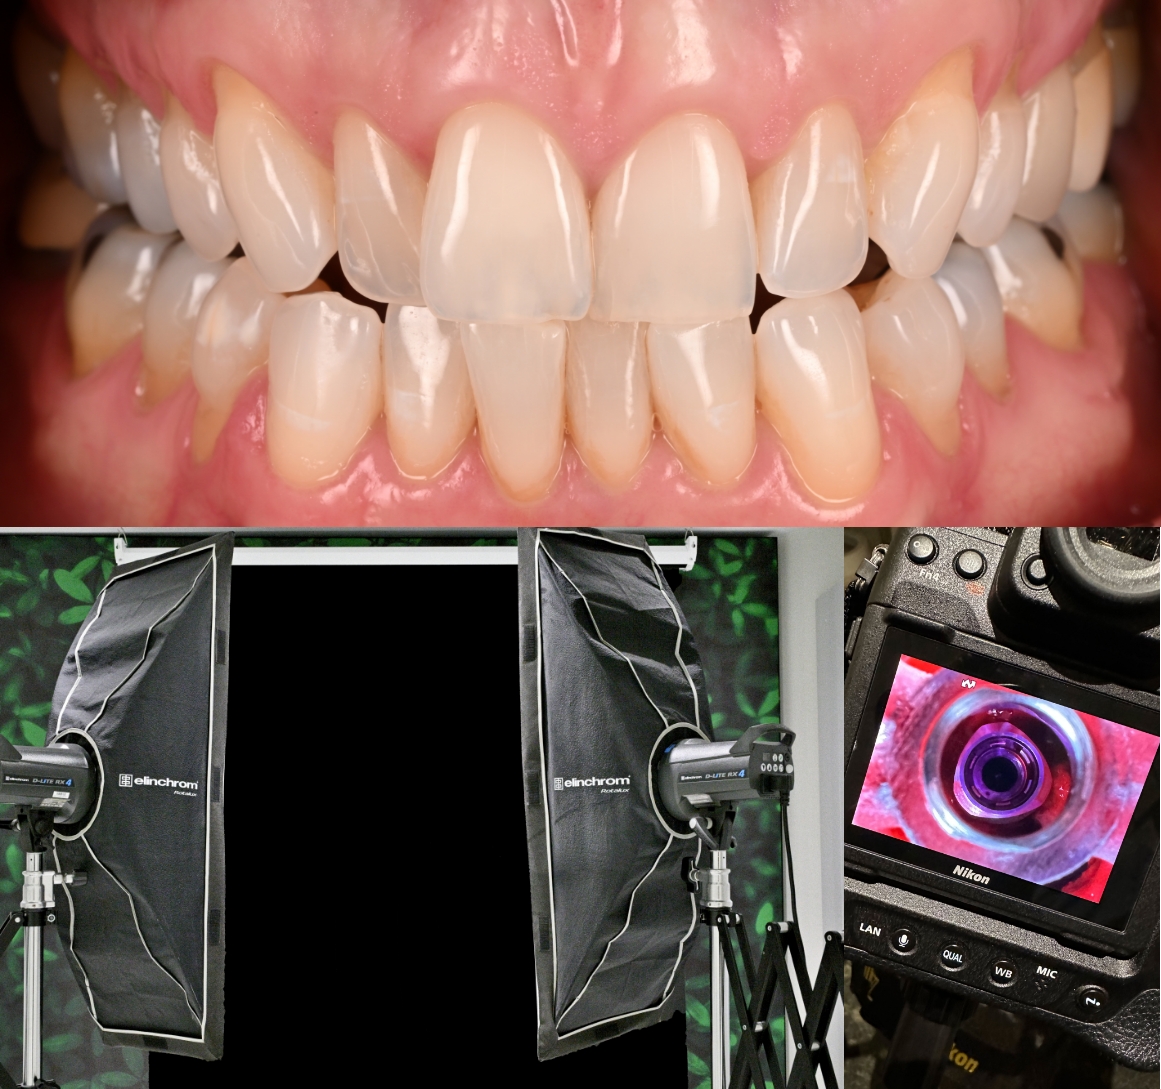 Collage featuring close up photo of teeth and professional photography equipment